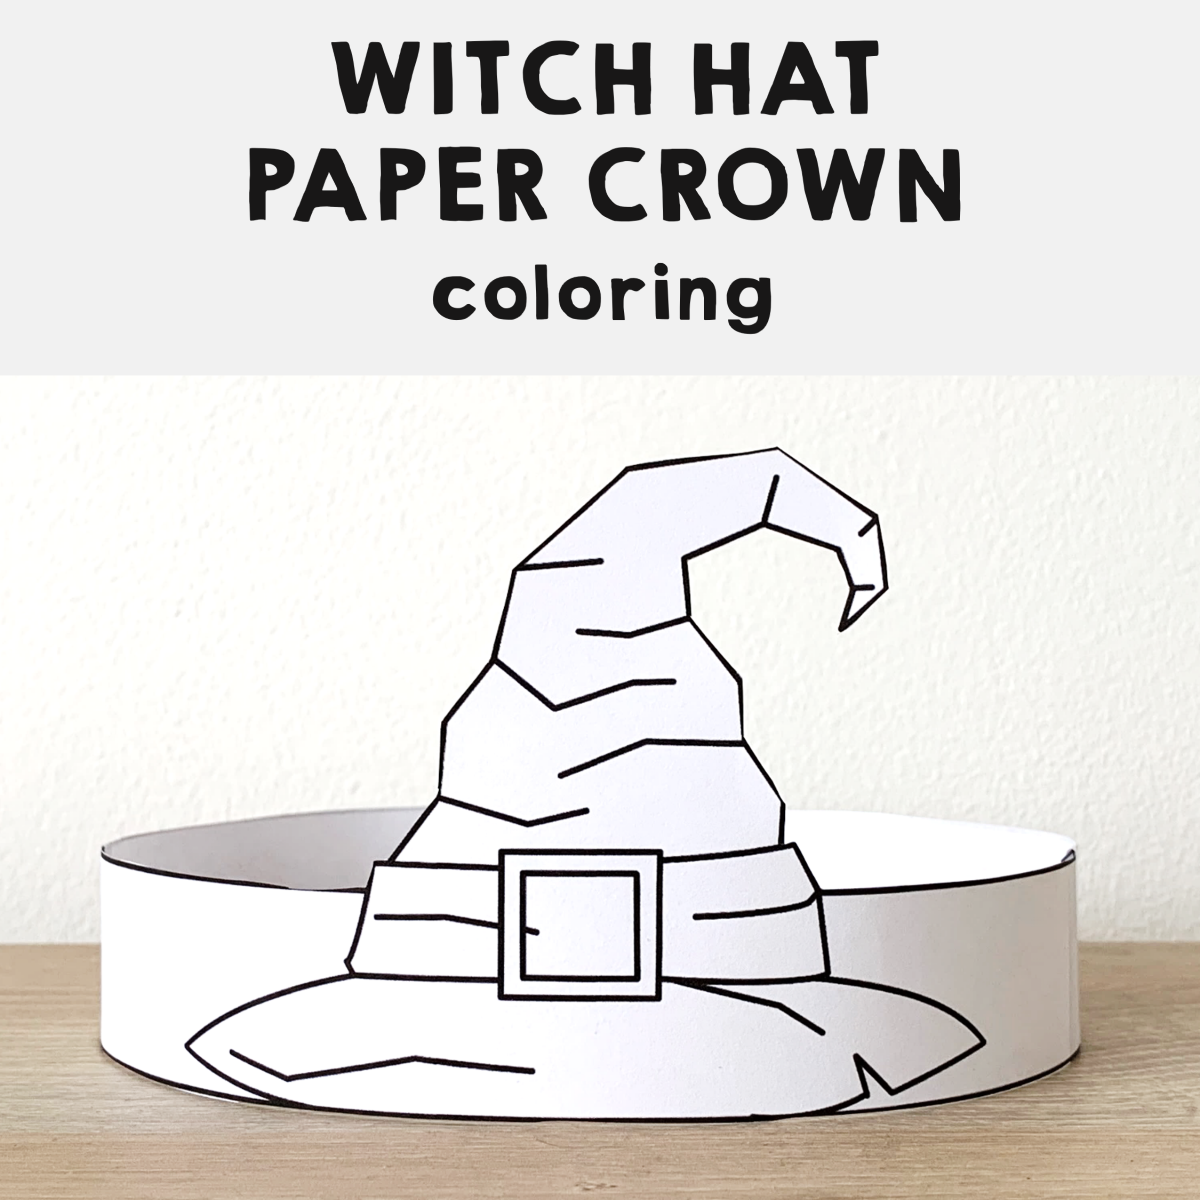 Witch hat paper crown printable coloring halloween spooky craft activity made by teachers